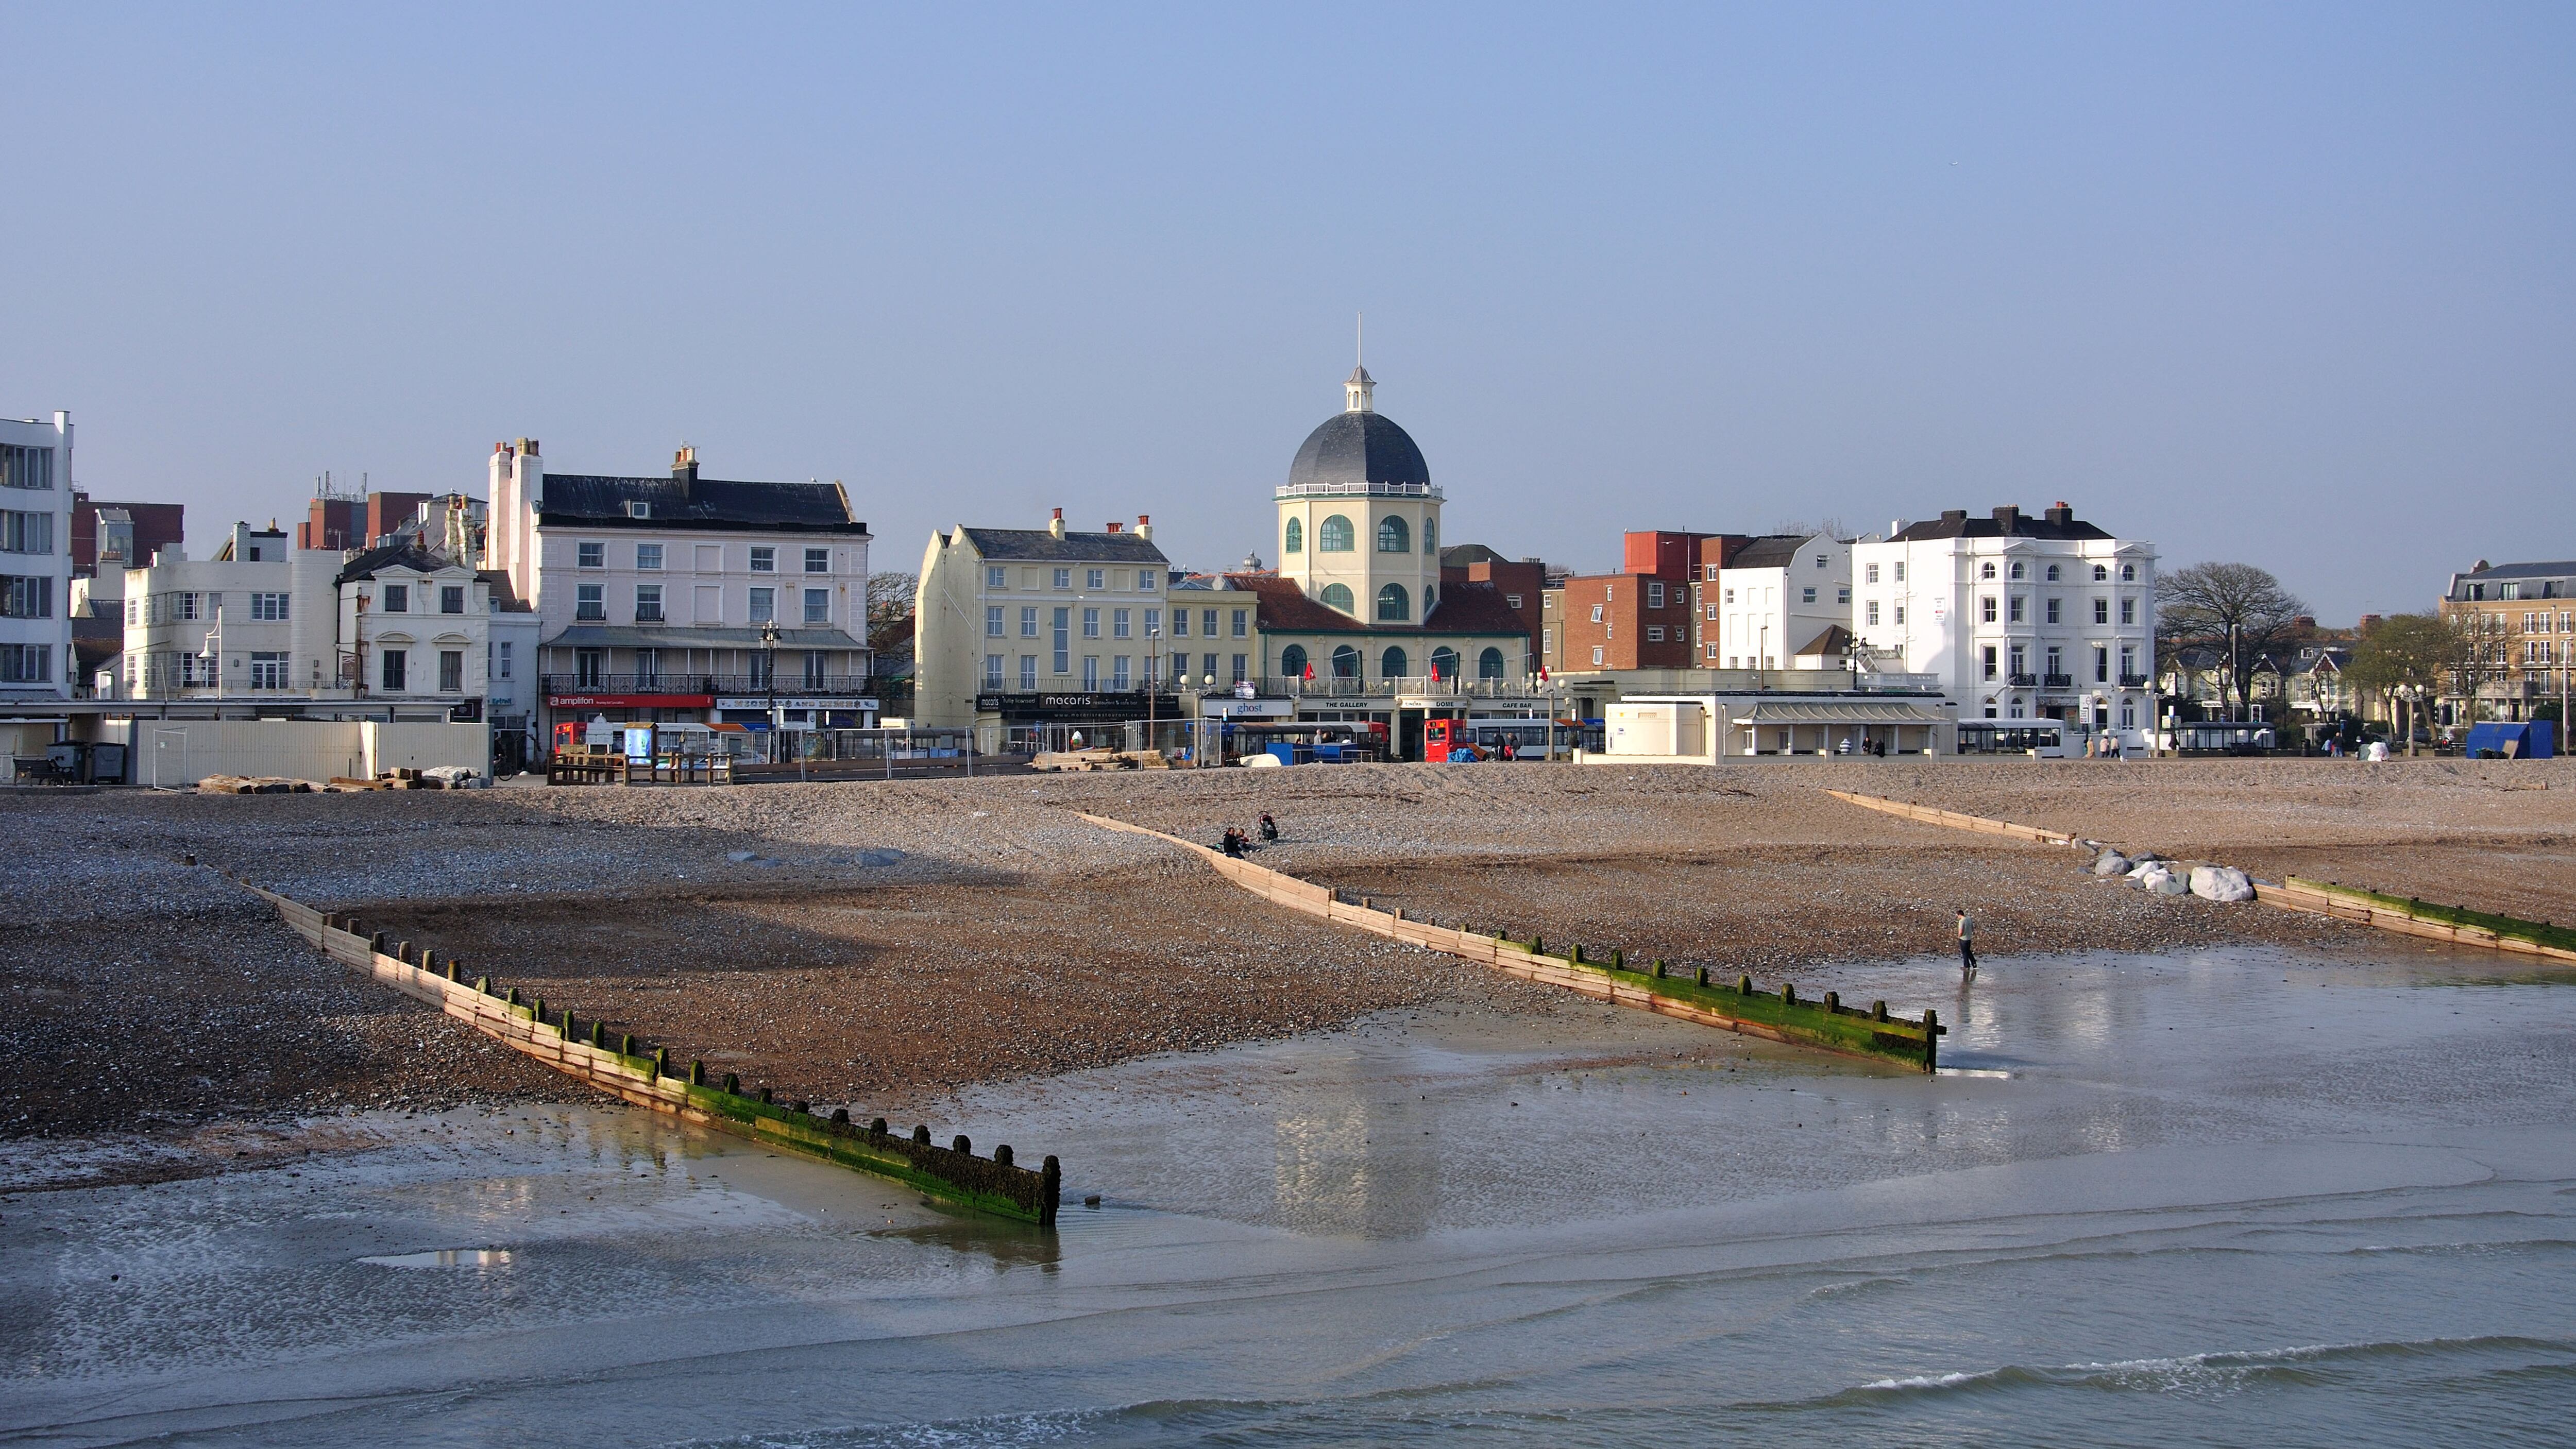 Worthing is developing a heat network for all its buildings